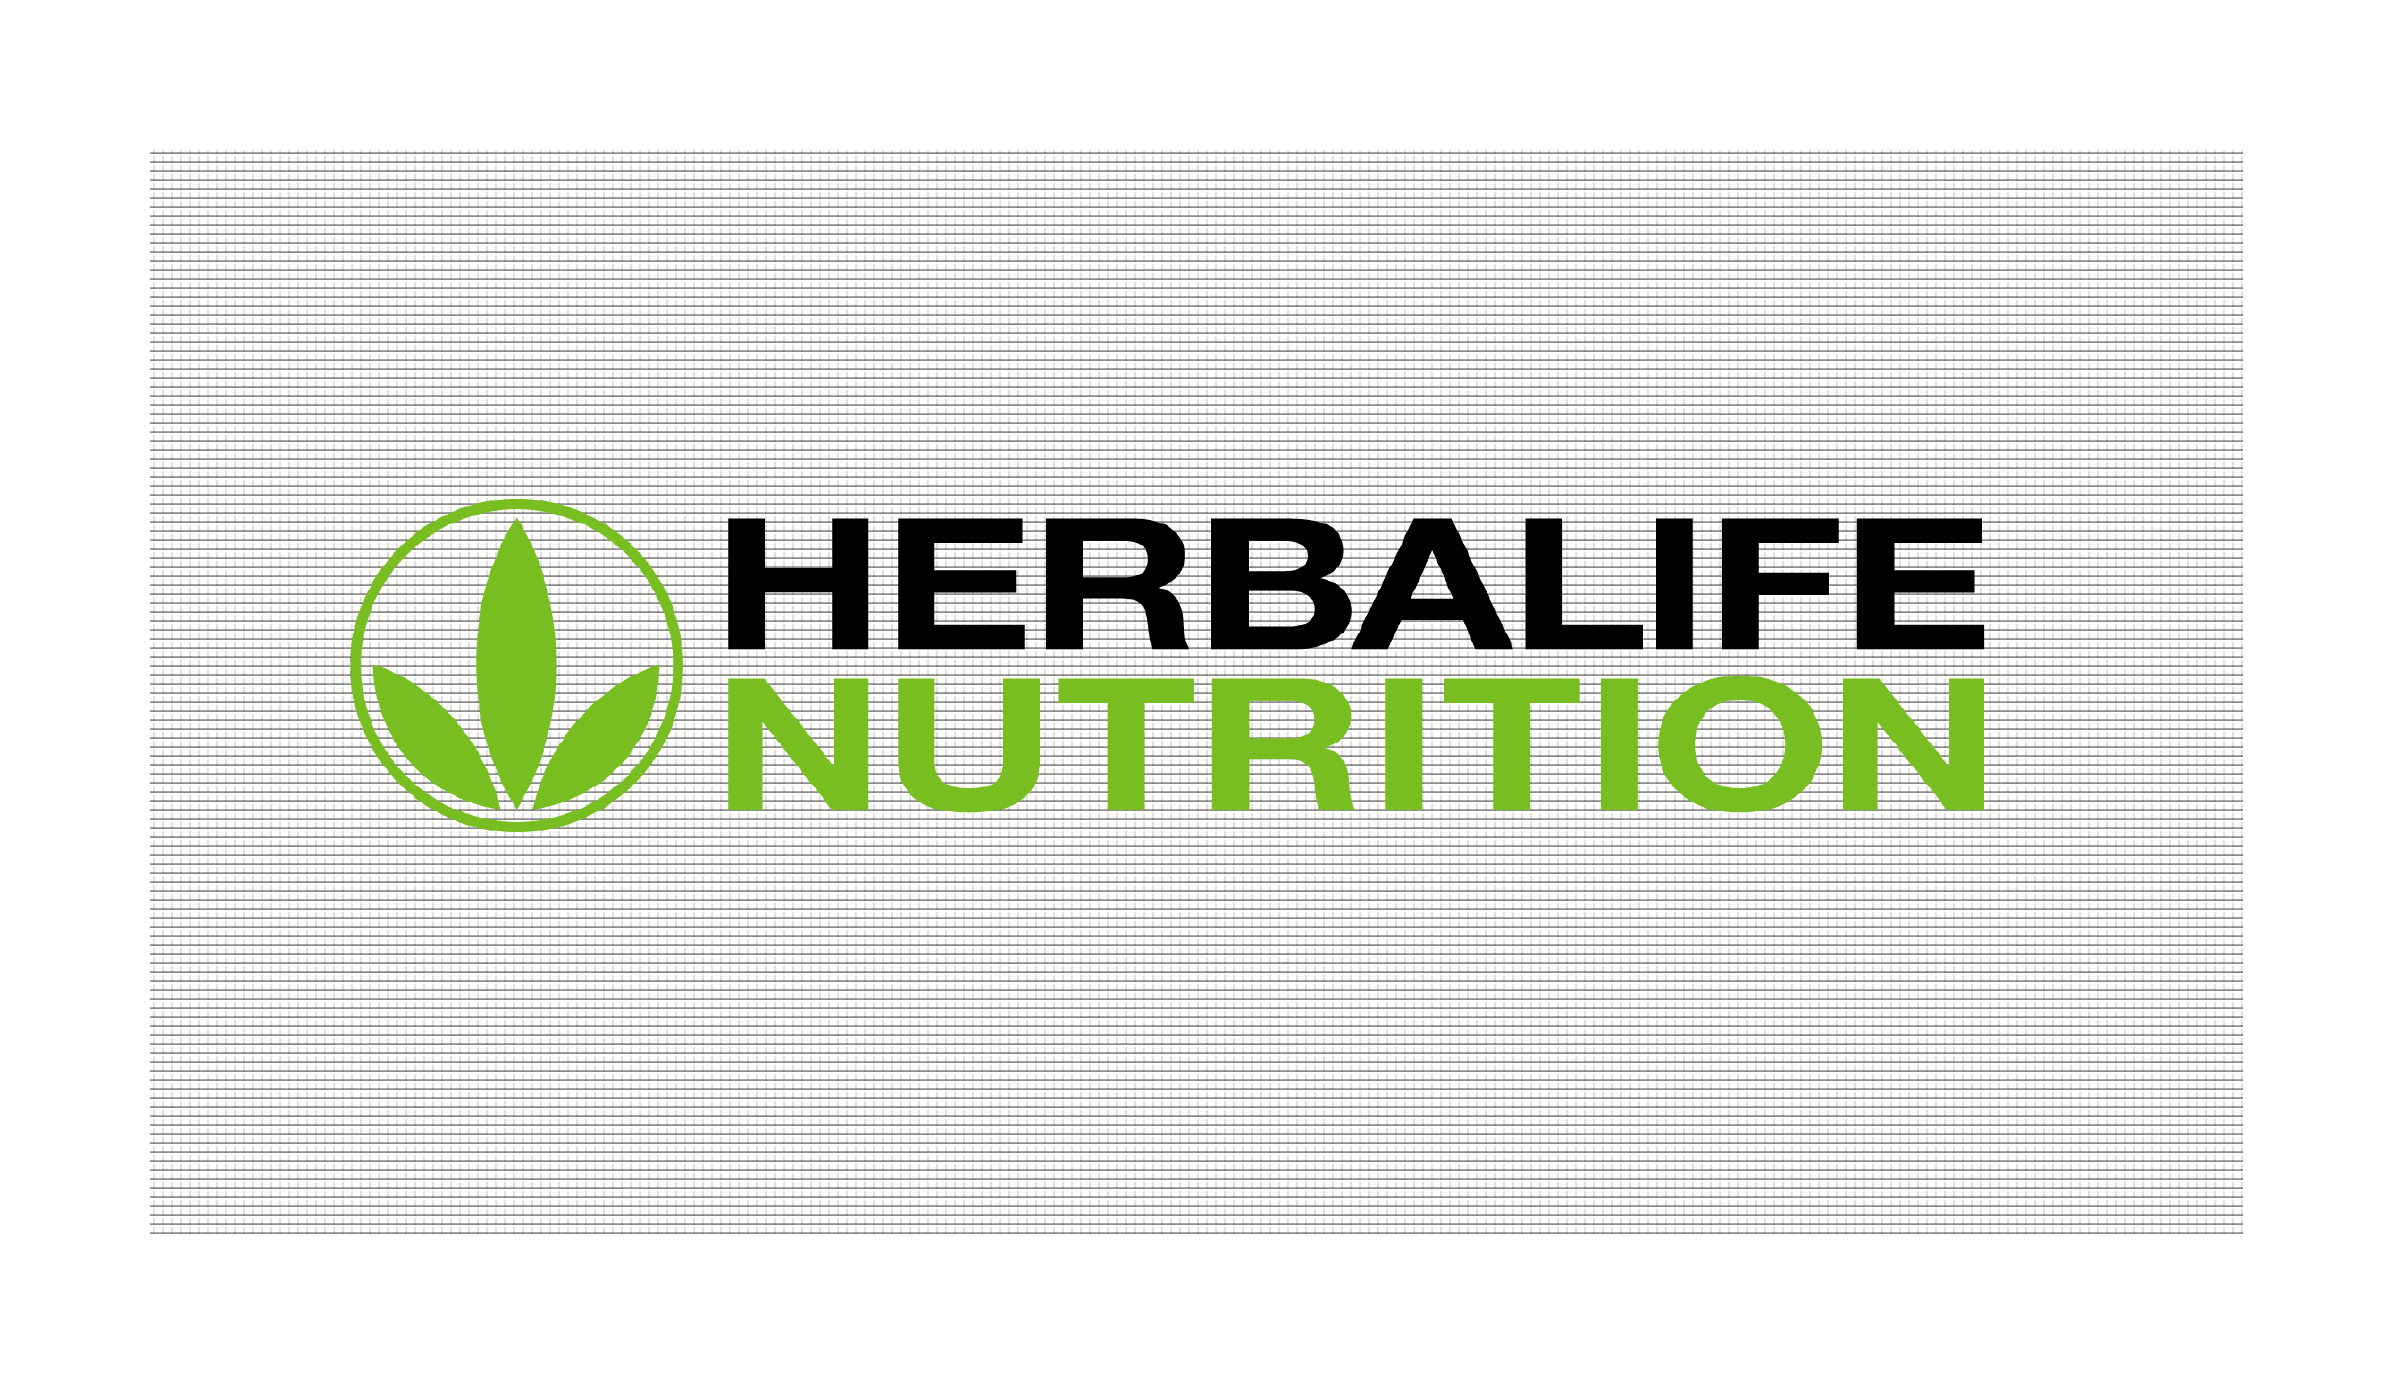 Herbalife Nutrition has opened a sales center in DC Citidel